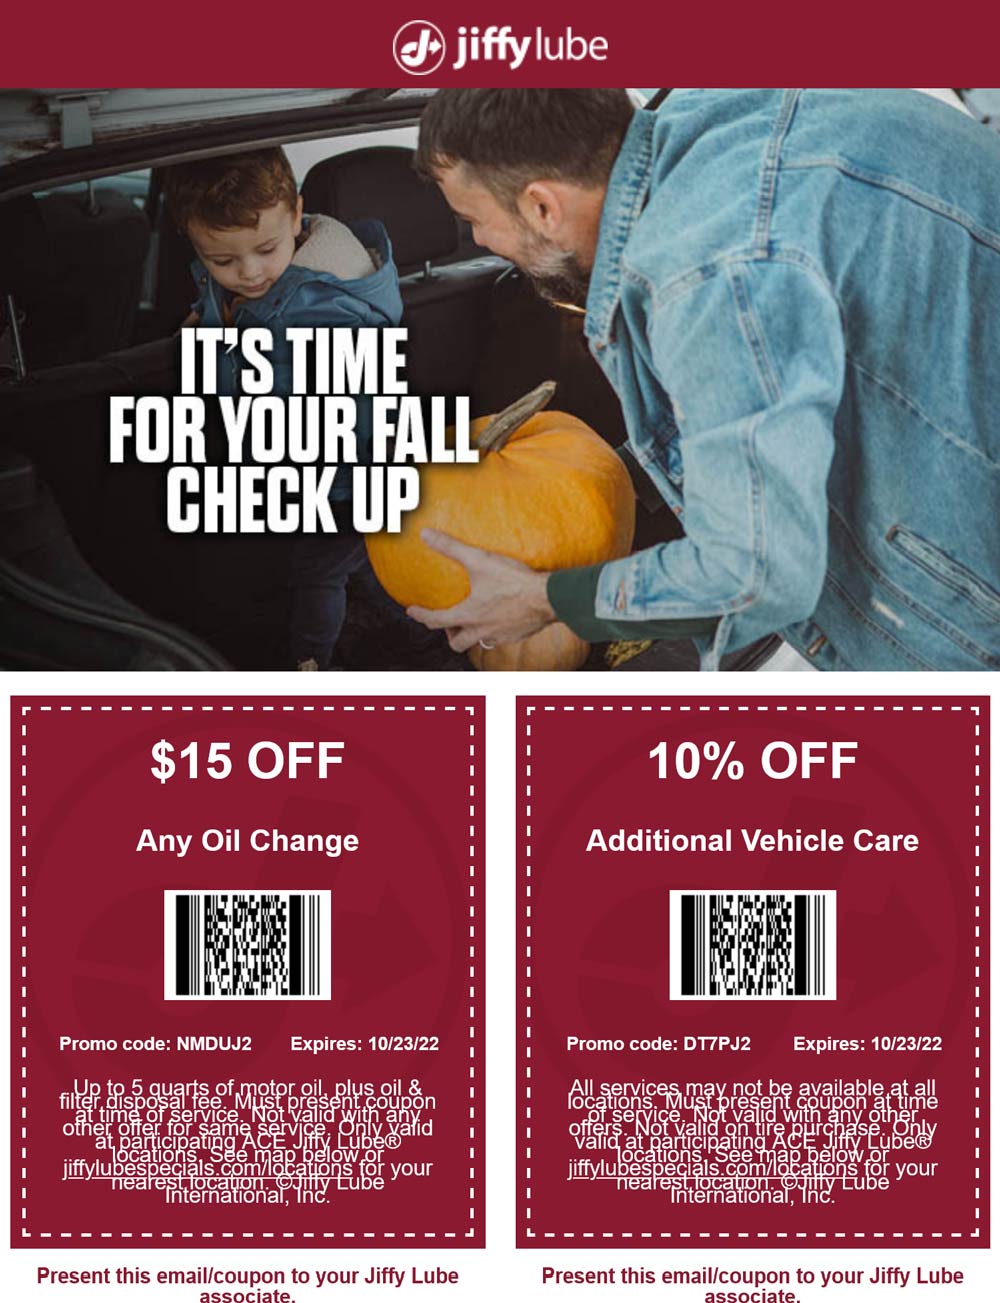 Jiffy Lube stores Coupon  $15 off any oil change at Jiffy Lube #jiffylube 